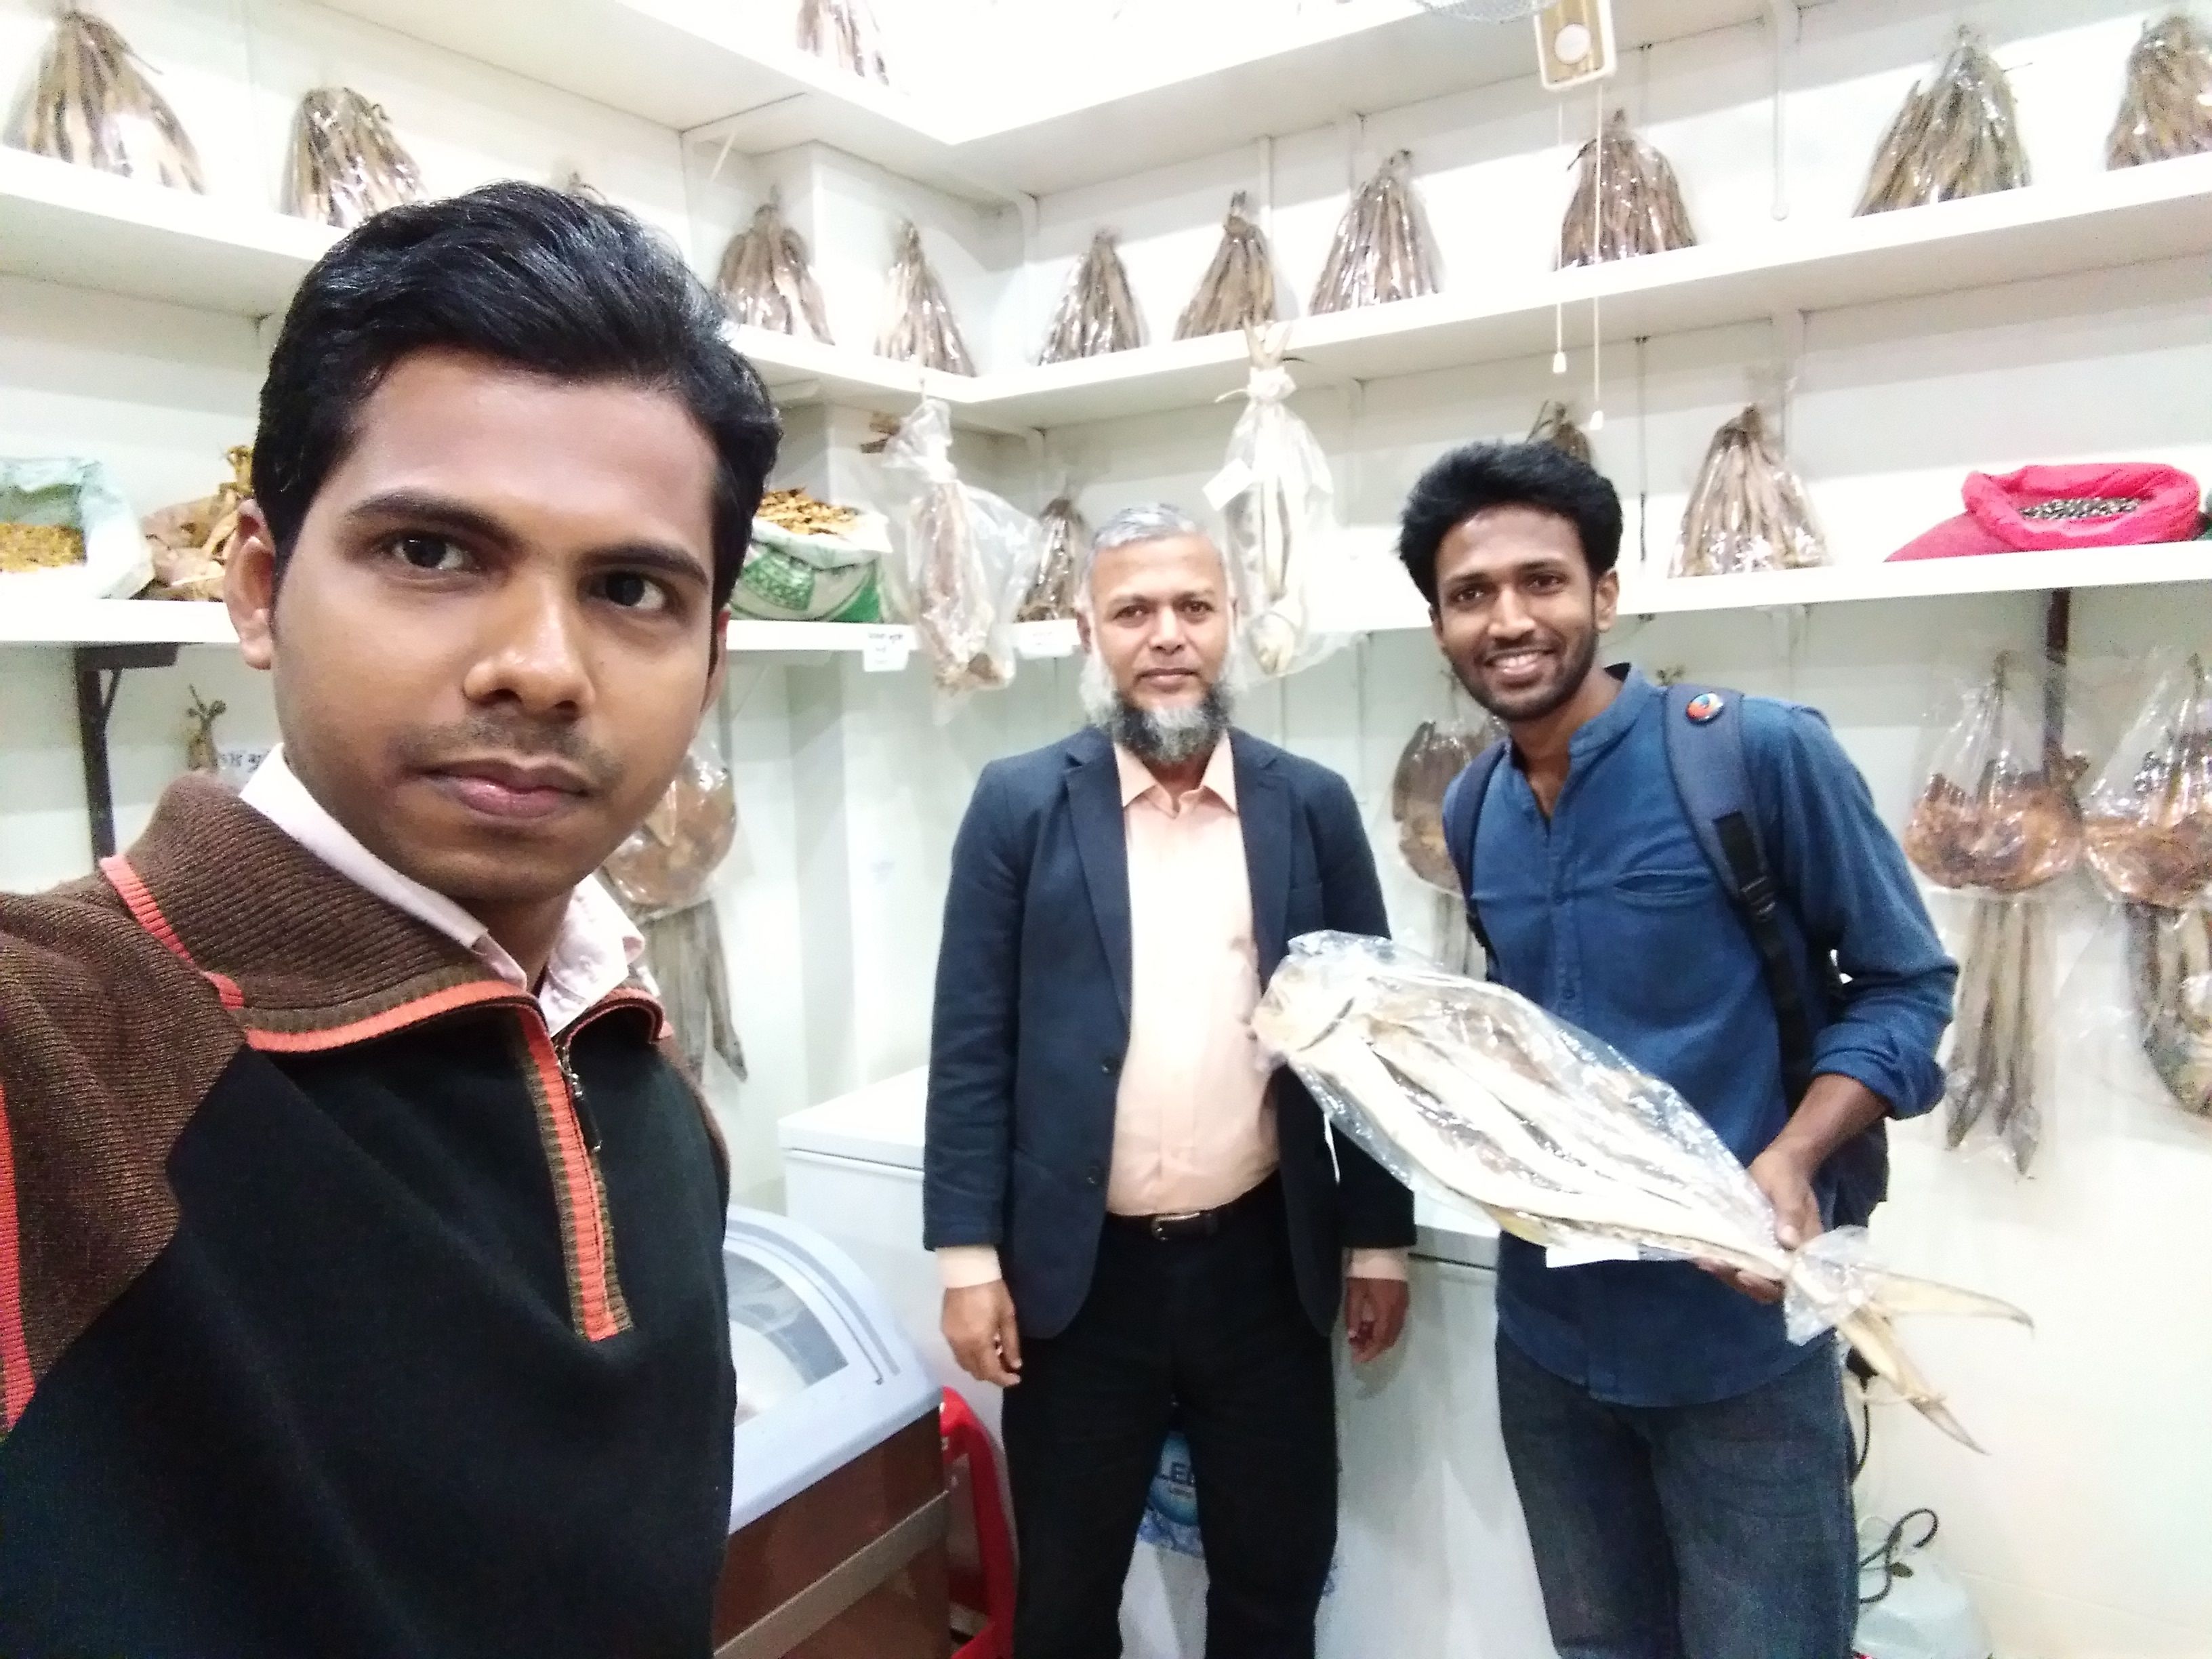 Sadman brother take a big dry sea fish & me. Middle man is shop owner.